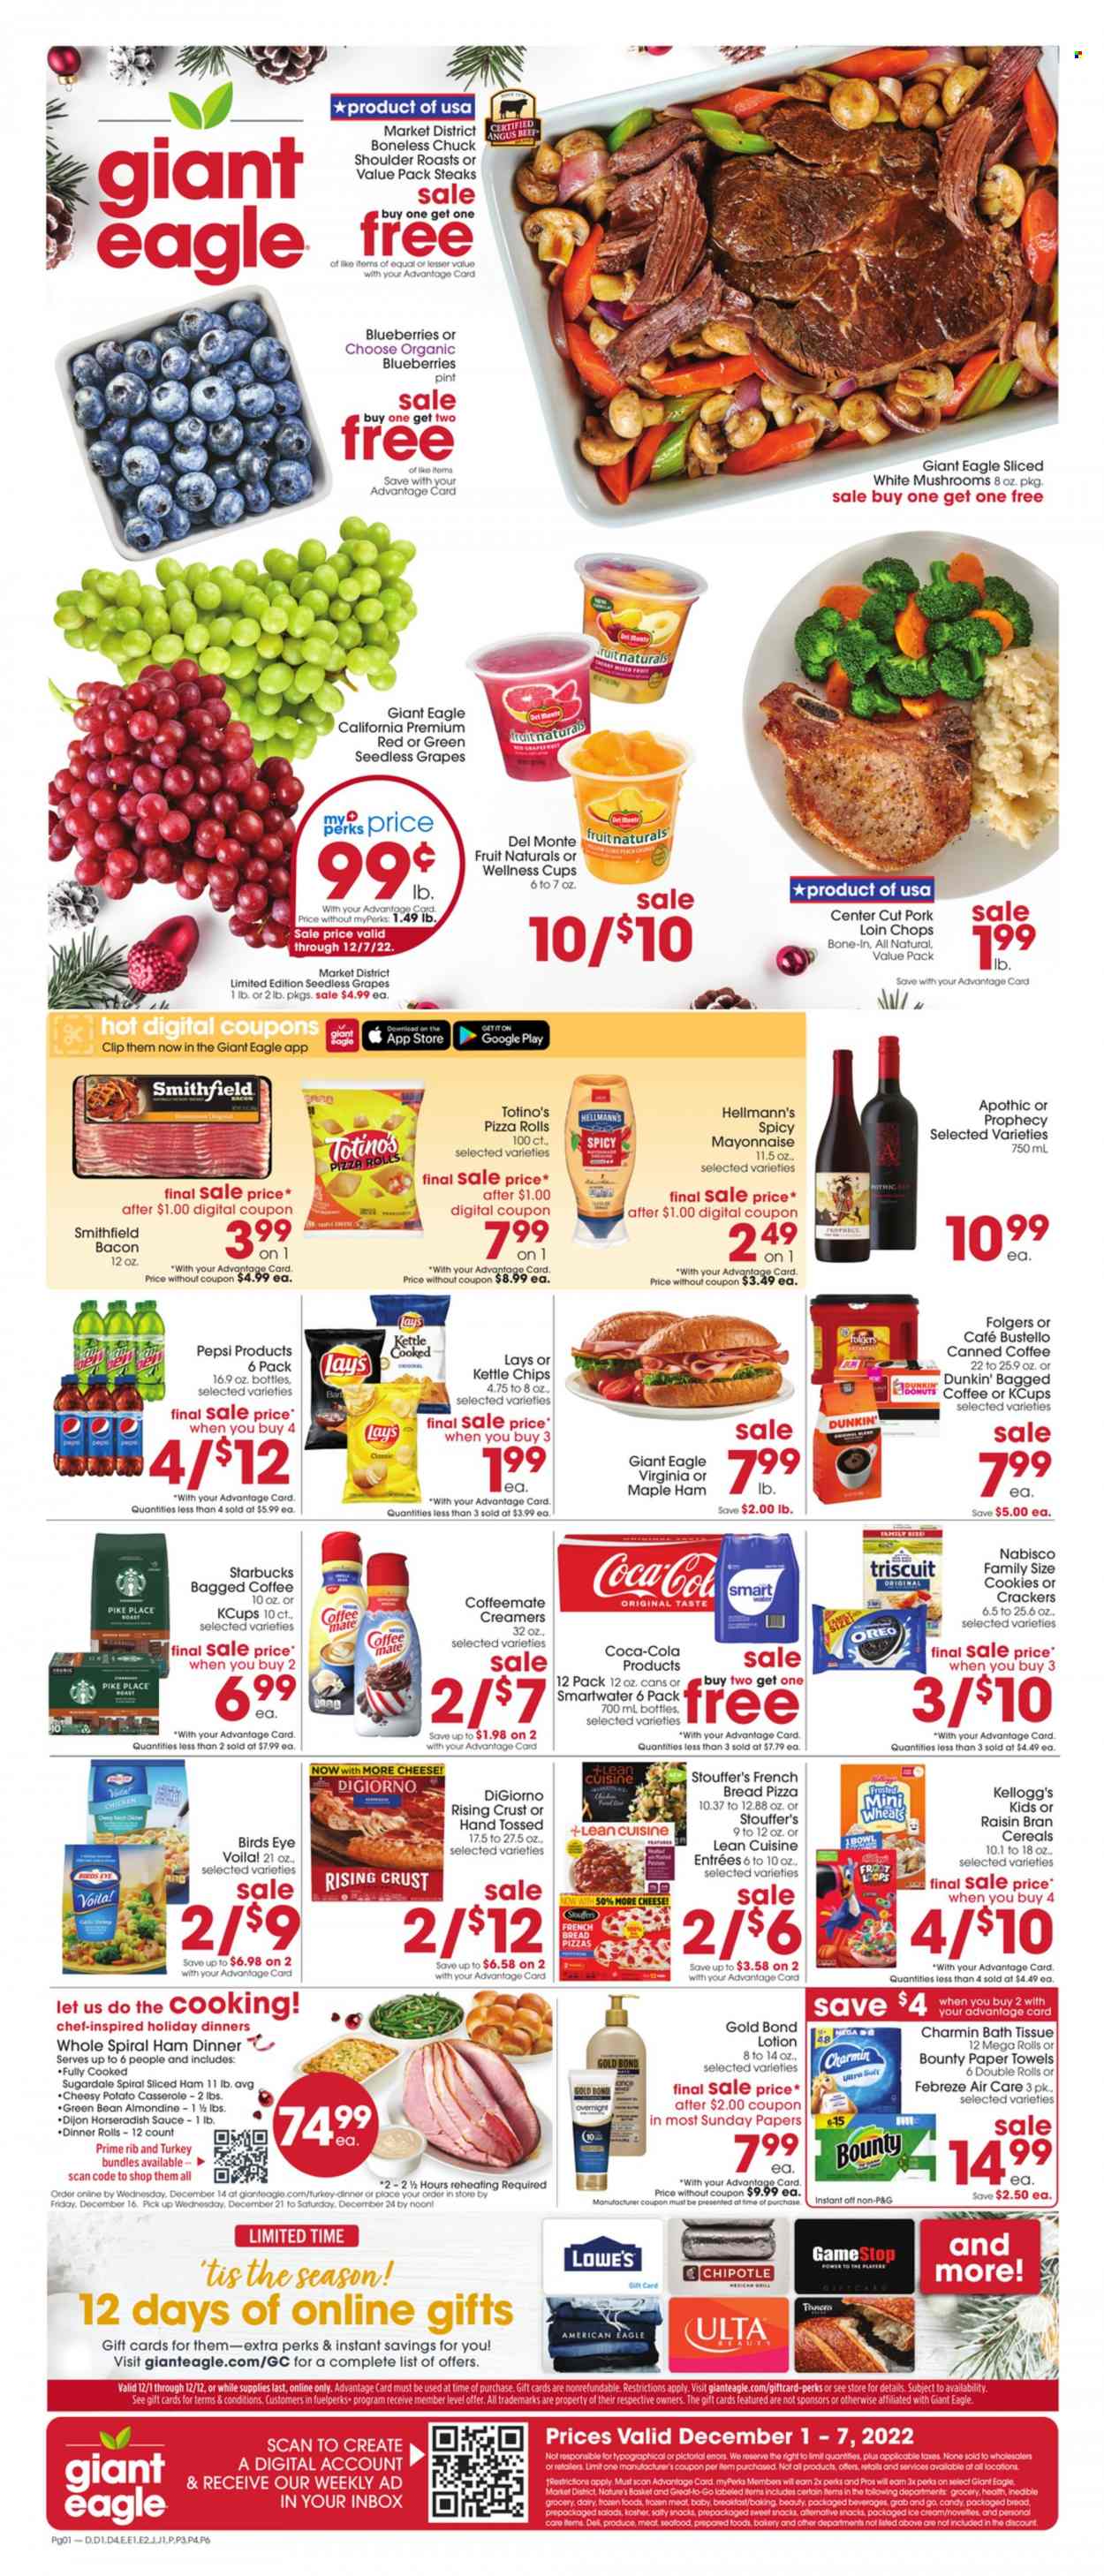 thumbnail - Giant Eagle Flyer - 12/01/2022 - 12/07/2022 - Sales products - pizza rolls, dinner rolls, french bread, garlic, horseradish, blueberries, grapefruits, grapes, seedless grapes, cherries, seafood, shrimps, pizza, sauce, Bird's Eye, Lean Cuisine, Sugardale, bacon, ham, spiral ham, pepperoni, Oreo, Coffee-Mate, mayonnaise, Hellmann’s, ice cream, Stouffer's, cookies, snack, Bounty, crackers, Kellogg's, Lay’s, Del Monte, cereals, Raisin Bran, Coca-Cola, Pepsi, Smartwater, Starbucks, Folgers, Keurig, bagged coffee, beef meat, steak, pork chops, pork loin, pork meat, bath tissue, kitchen towels, paper towels, Charmin, Febreze, body lotion, casserole, cup. Page 1.